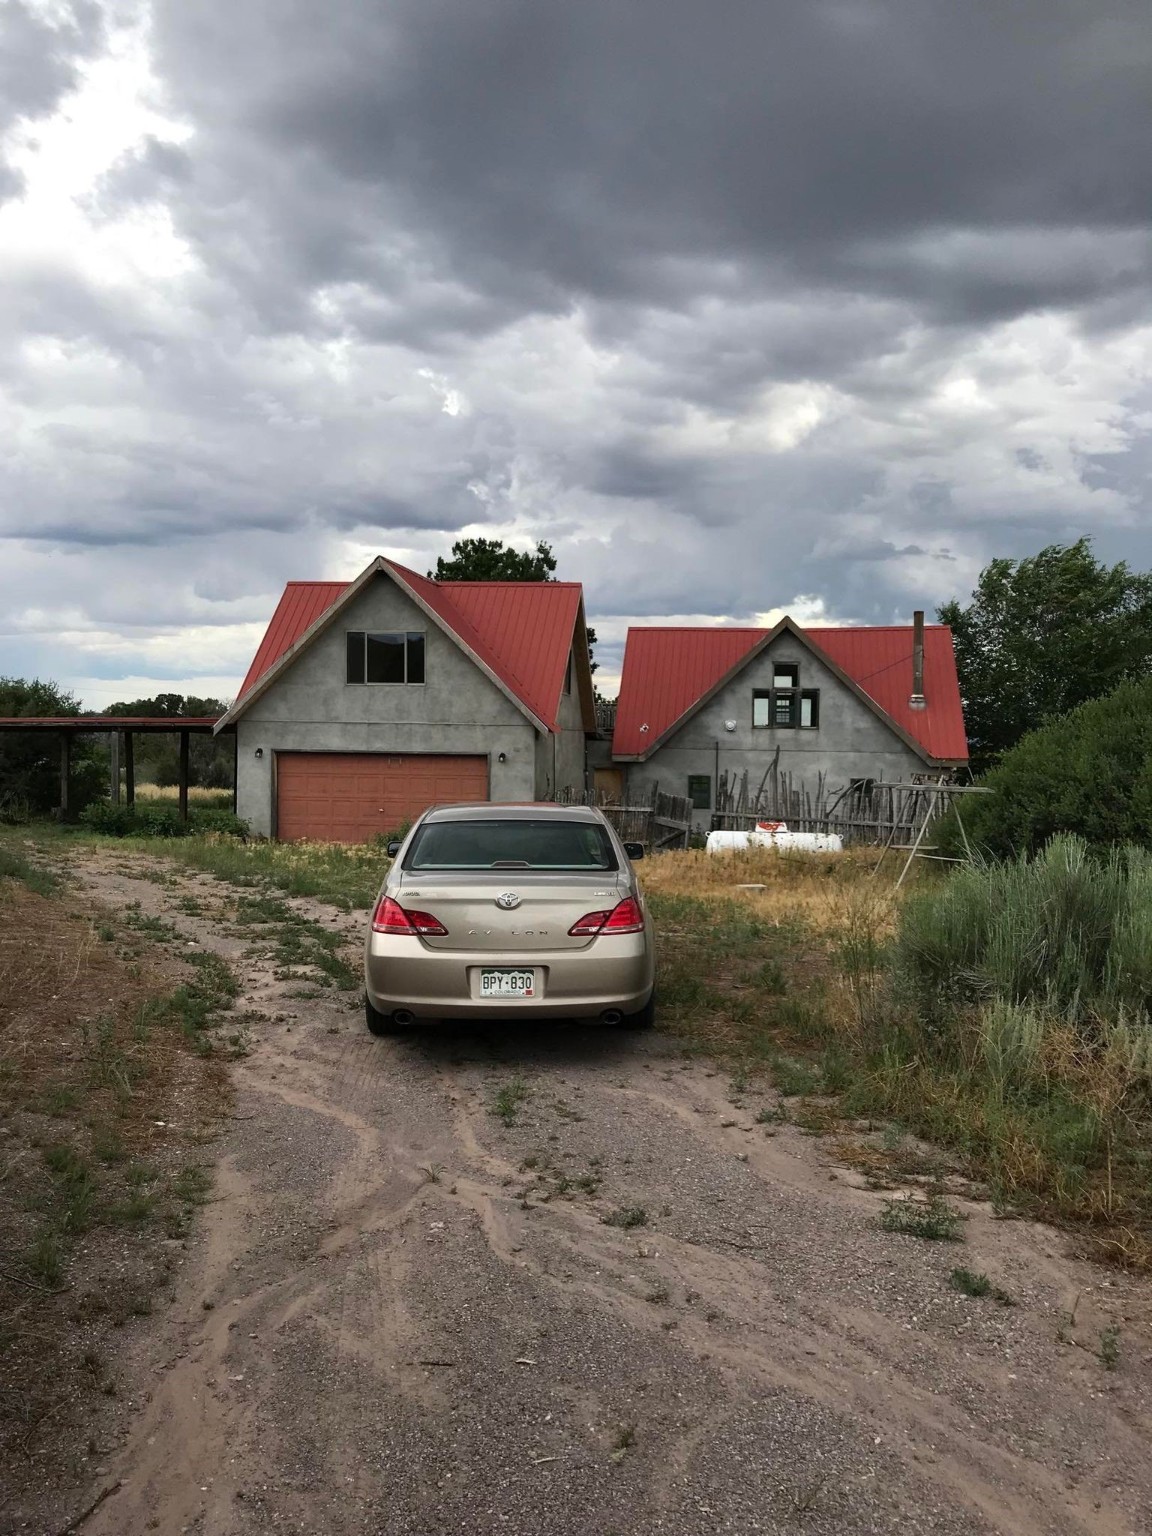 72 Private Drive 1685 NM-554 house 72, El Rito, New Mexico 87530, 2 Bedrooms Bedrooms, ,1 BathroomBathrooms,Residential,For Sale,72 Private Drive 1685 NM-554 house 72,202232529